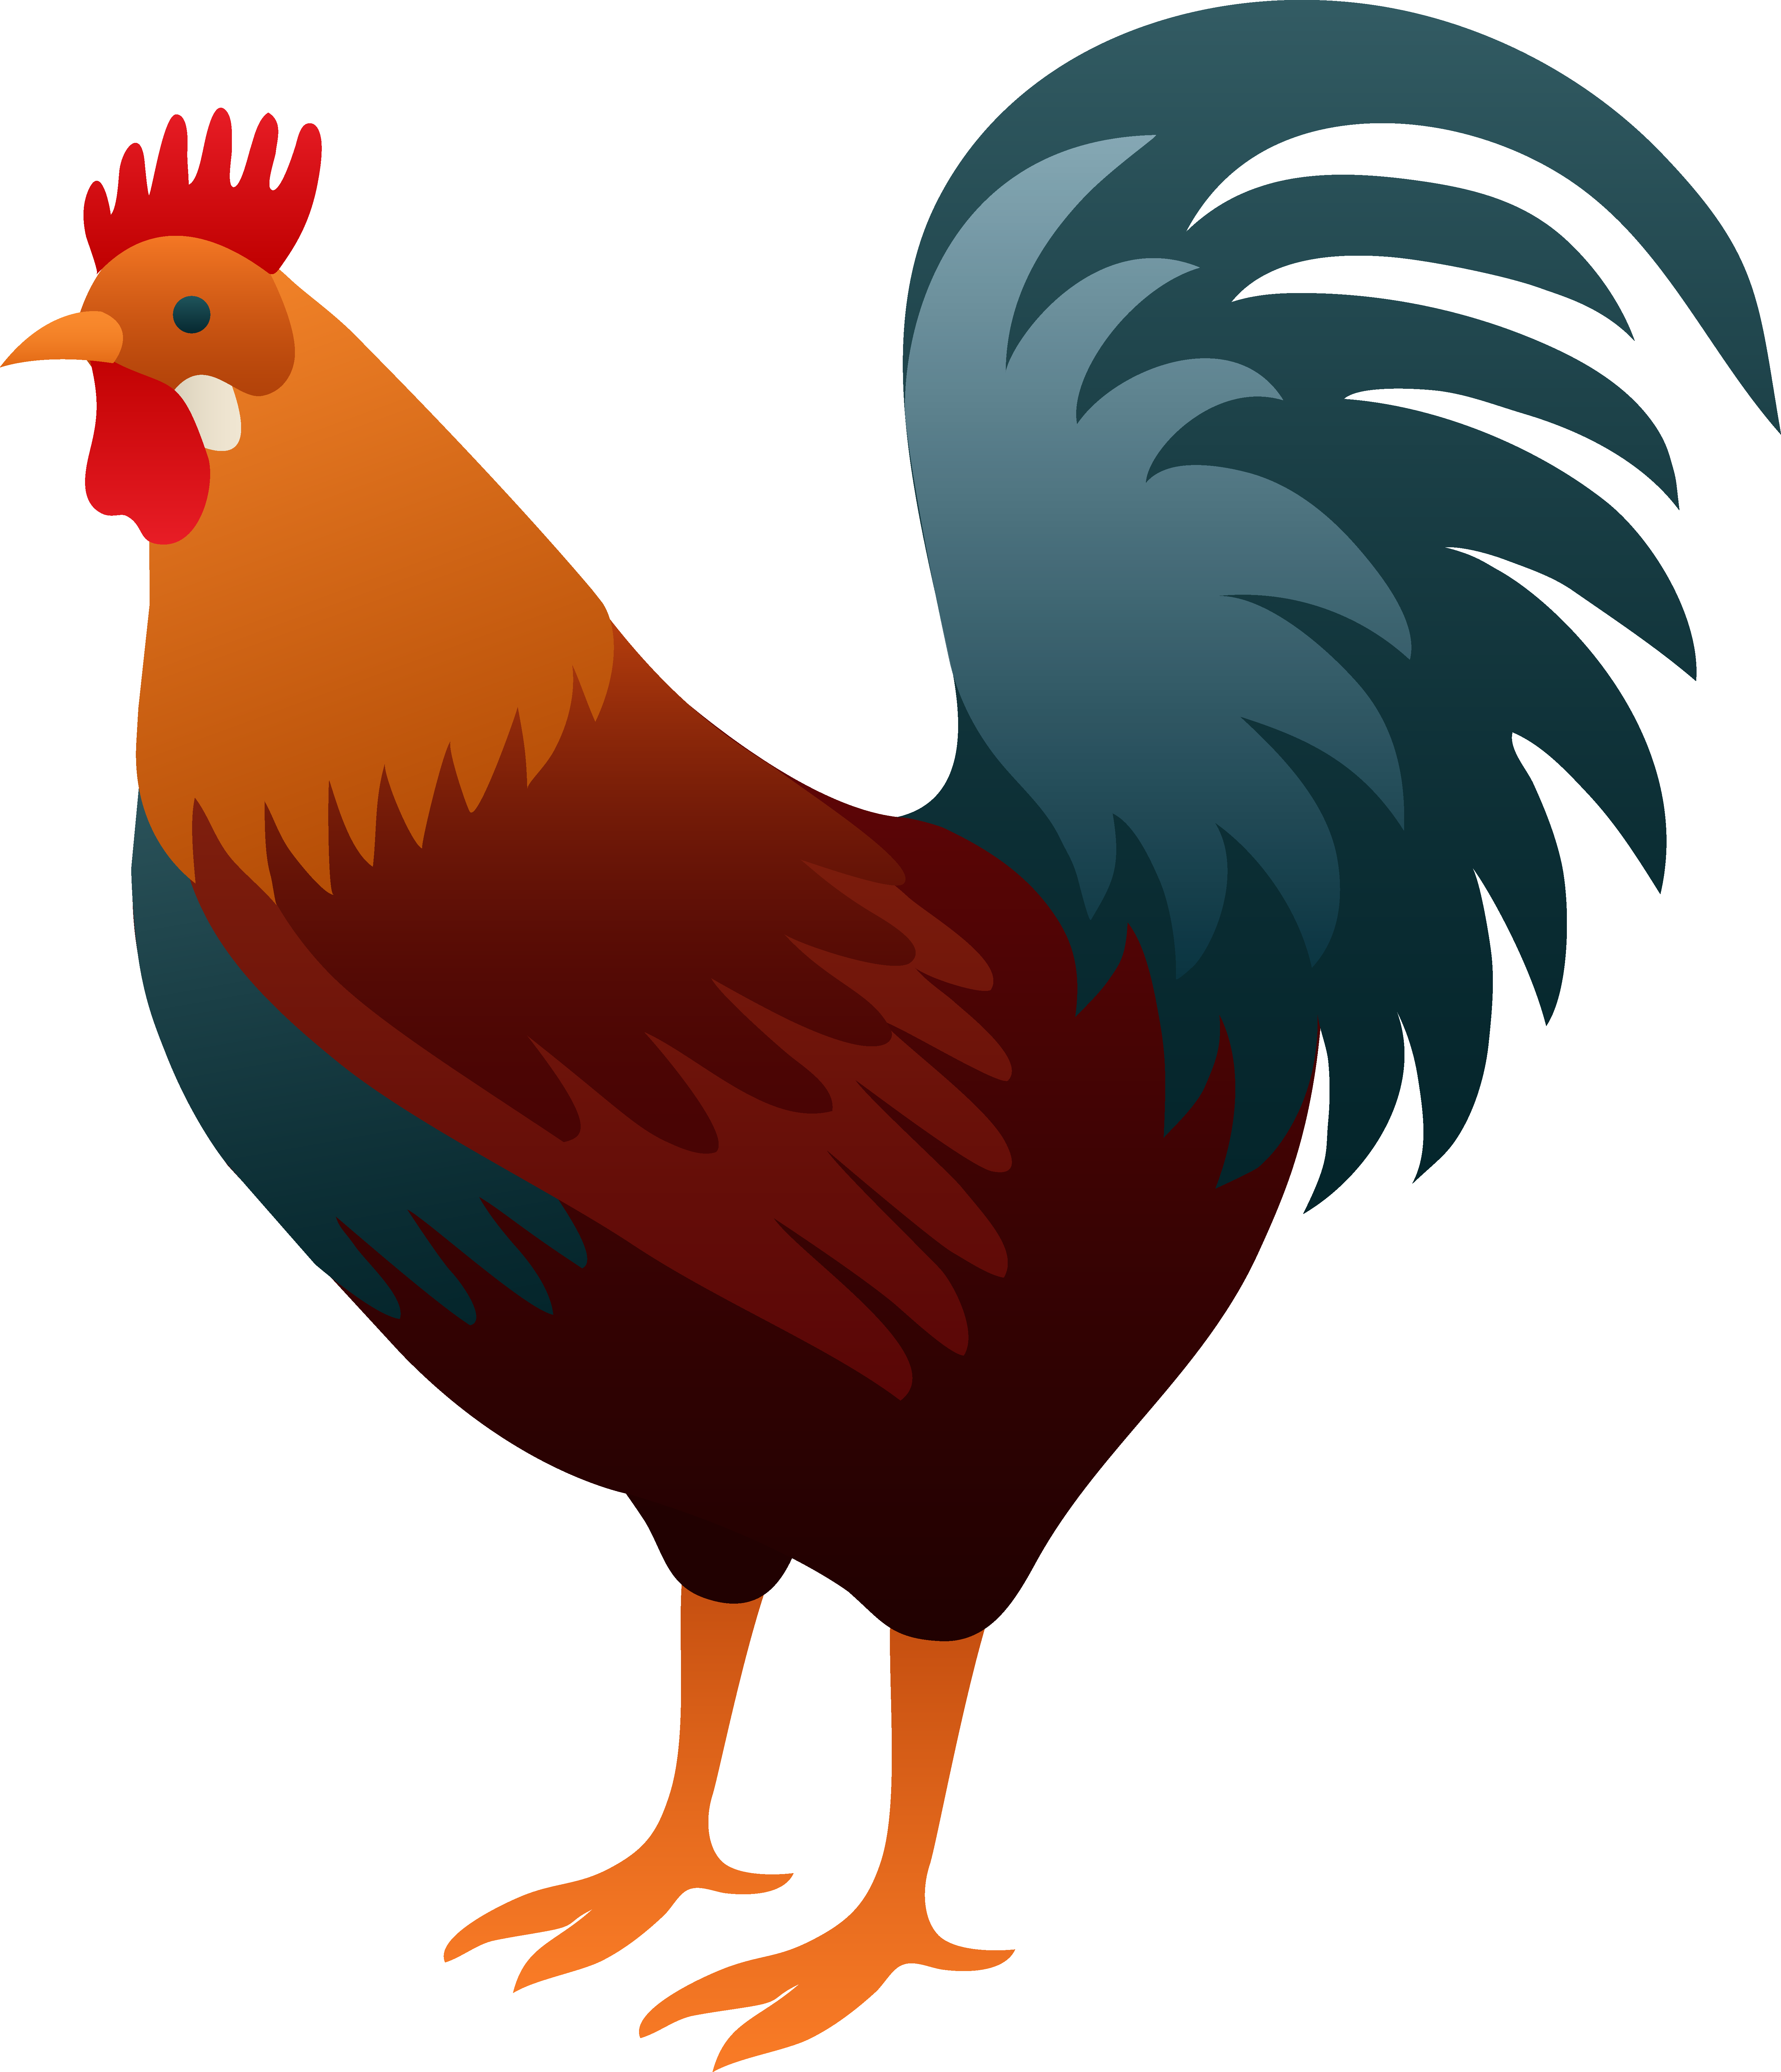 Rooster Drawings - ClipArt Best